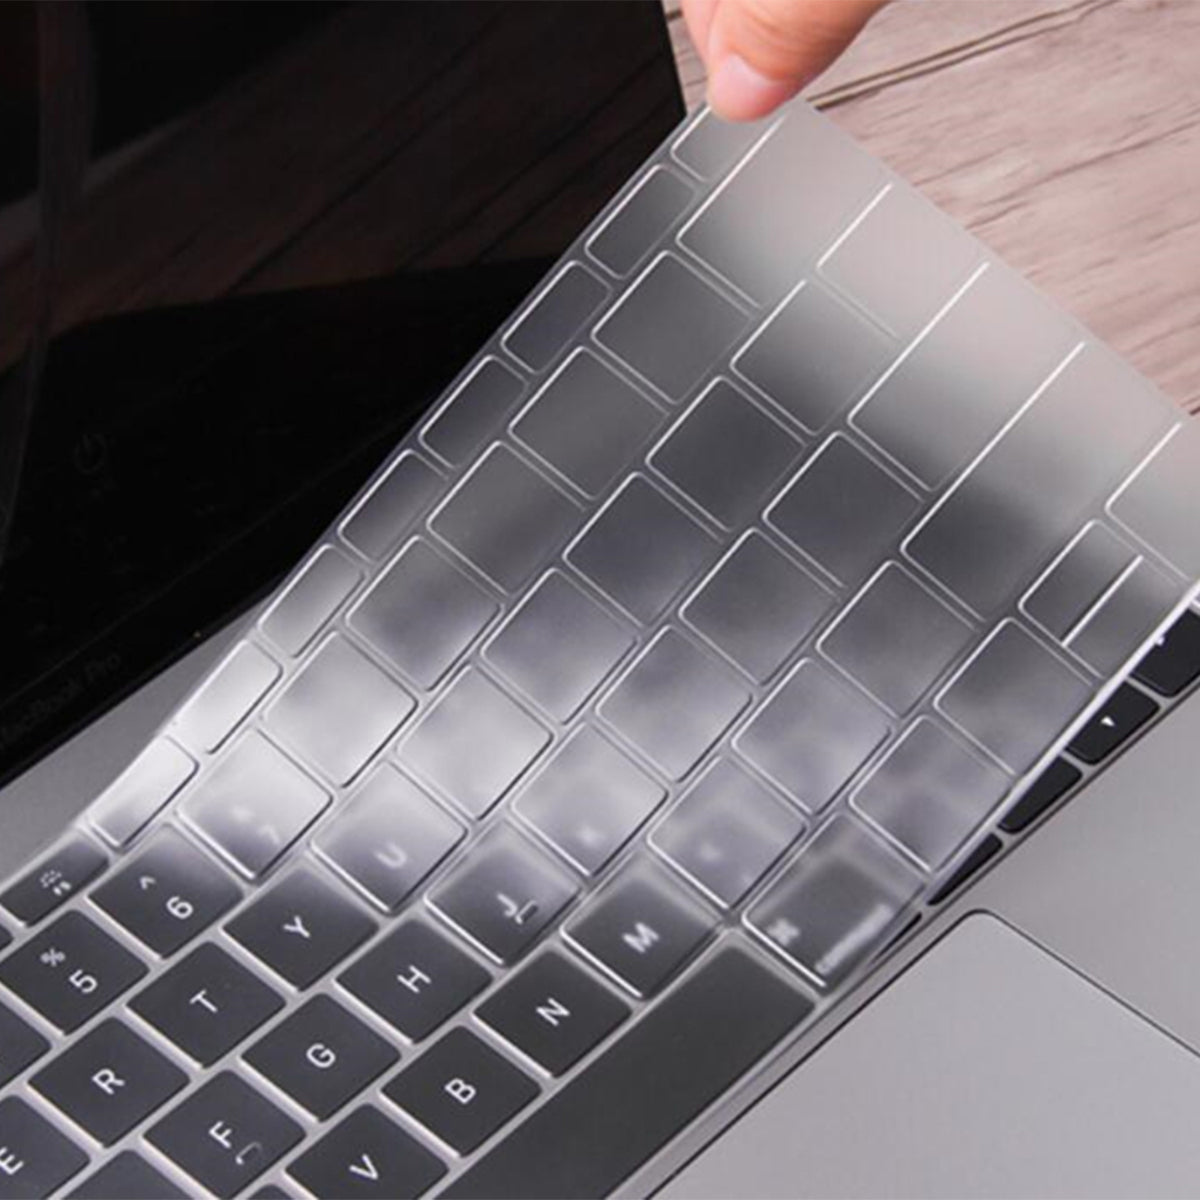 Soft TPU Keyboard Protector Wear-resistant Washable Keyboard Cover for MacBook Air 13.3inch (A2179/A2337) 2020